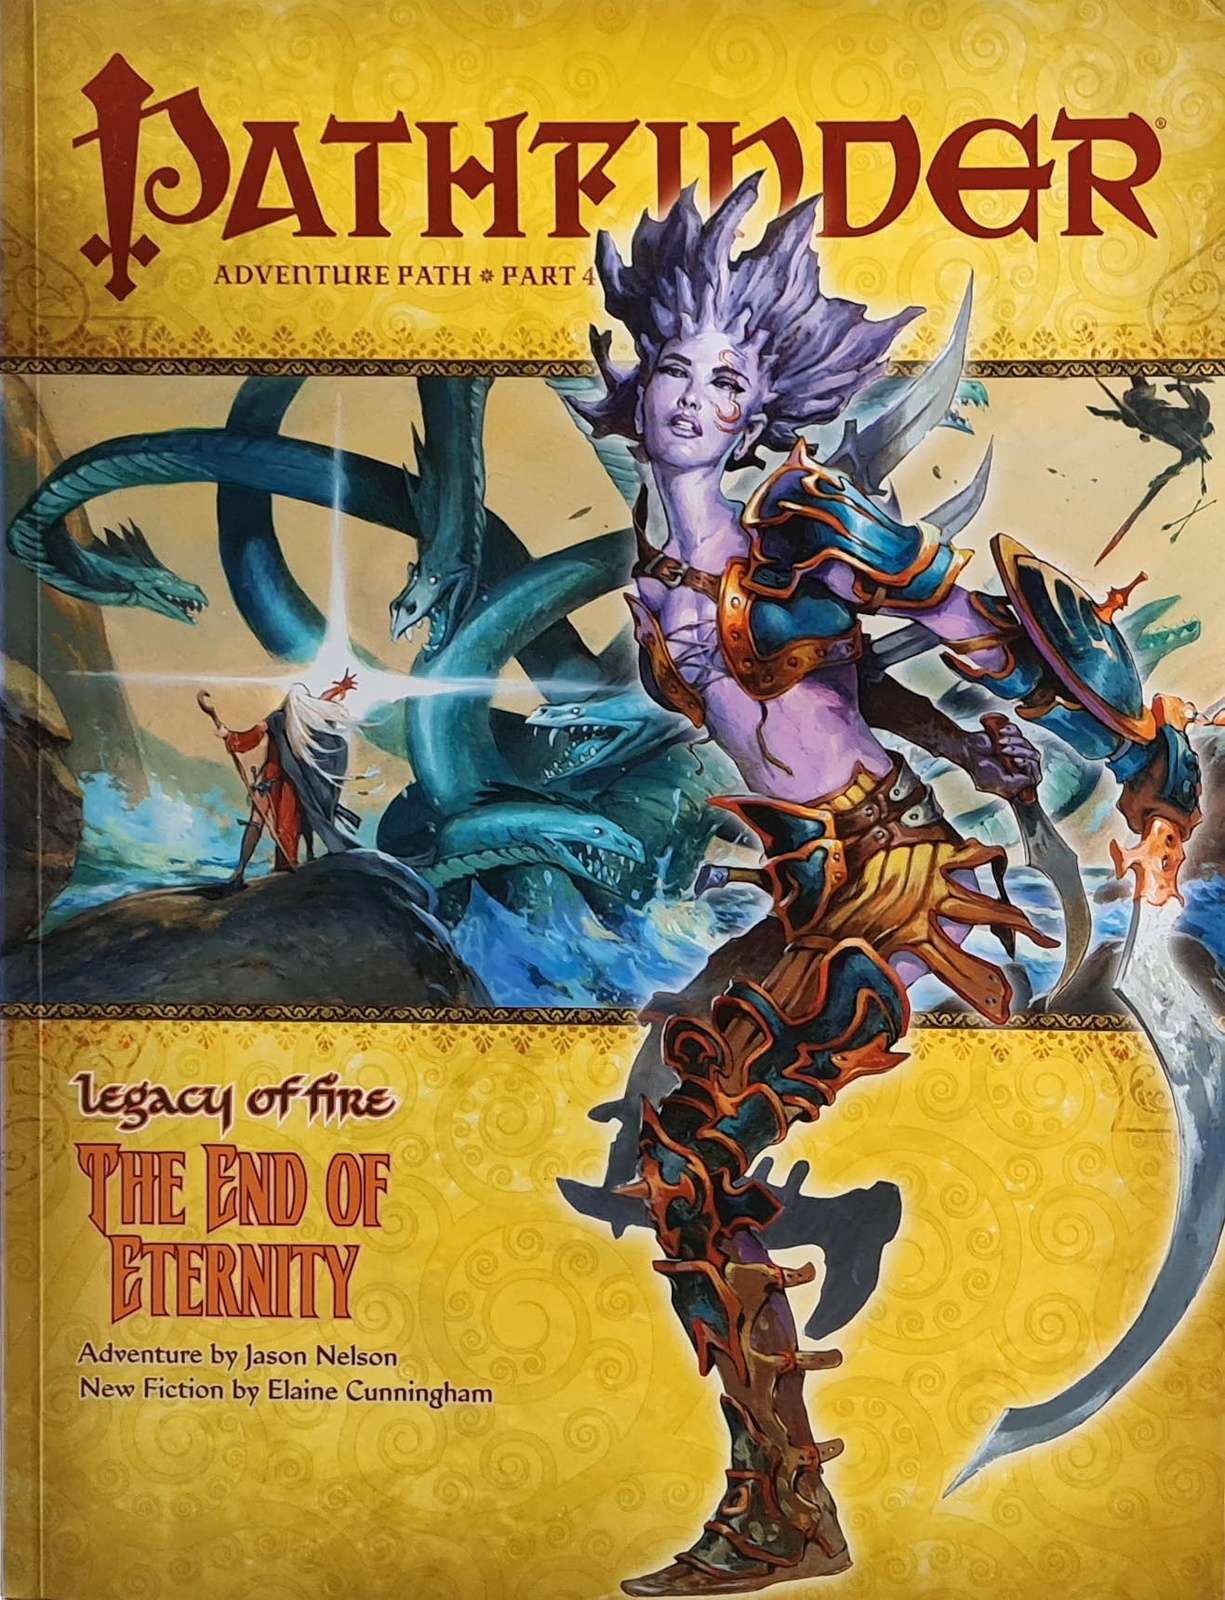 Pathfinder - Legacy of Fire: The End of Eternity (22)